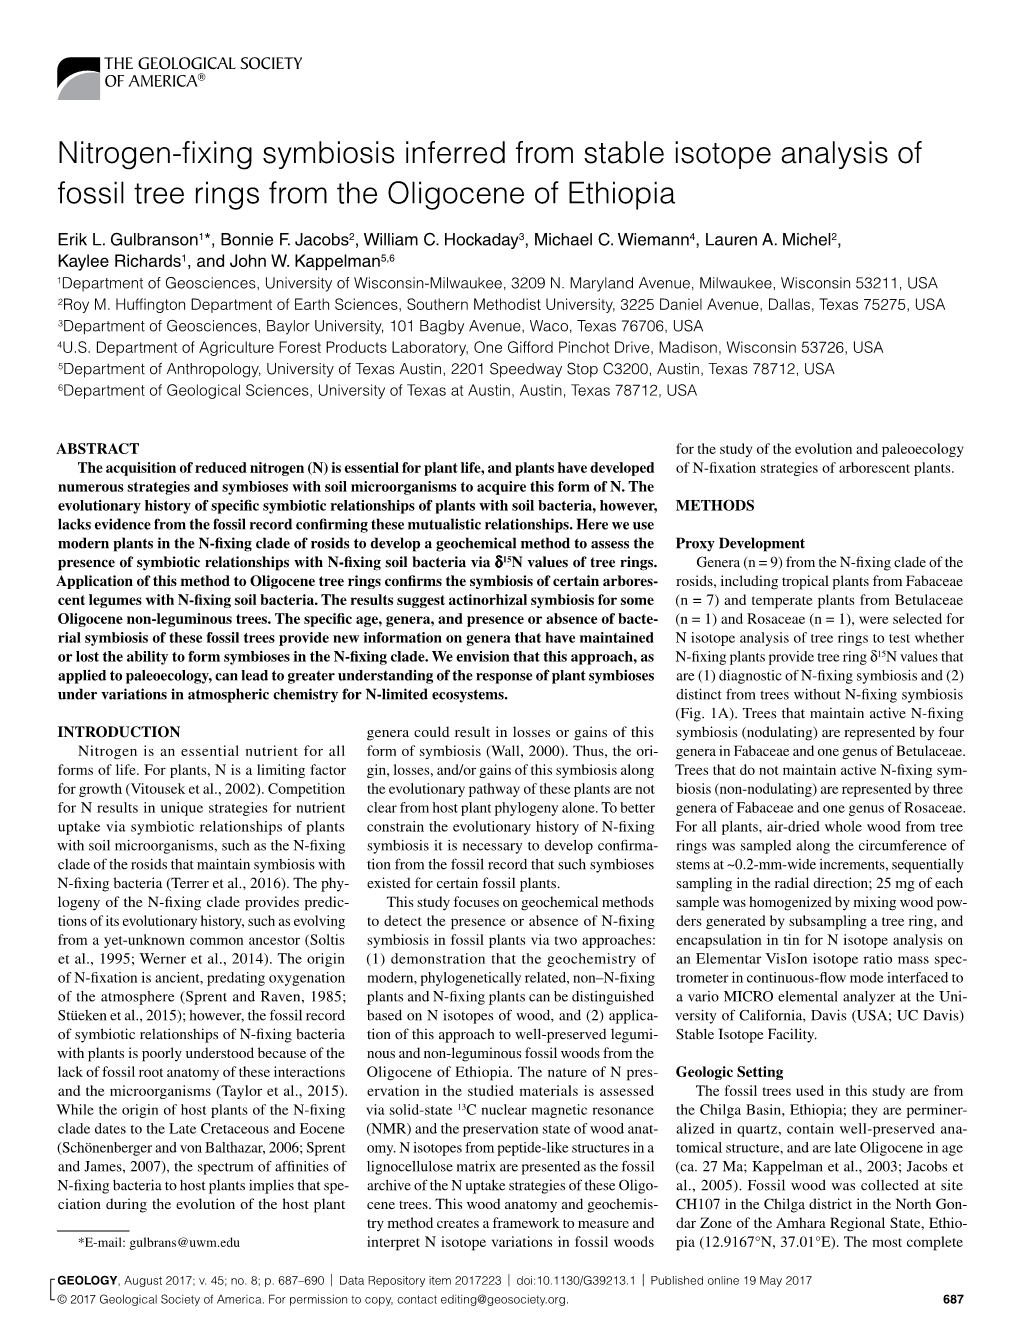 Nitrogen-Fixing Symbiosis Inferred from Stable Isotope Analysis of Fossil Tree Rings from the Oligocene of Ethiopia